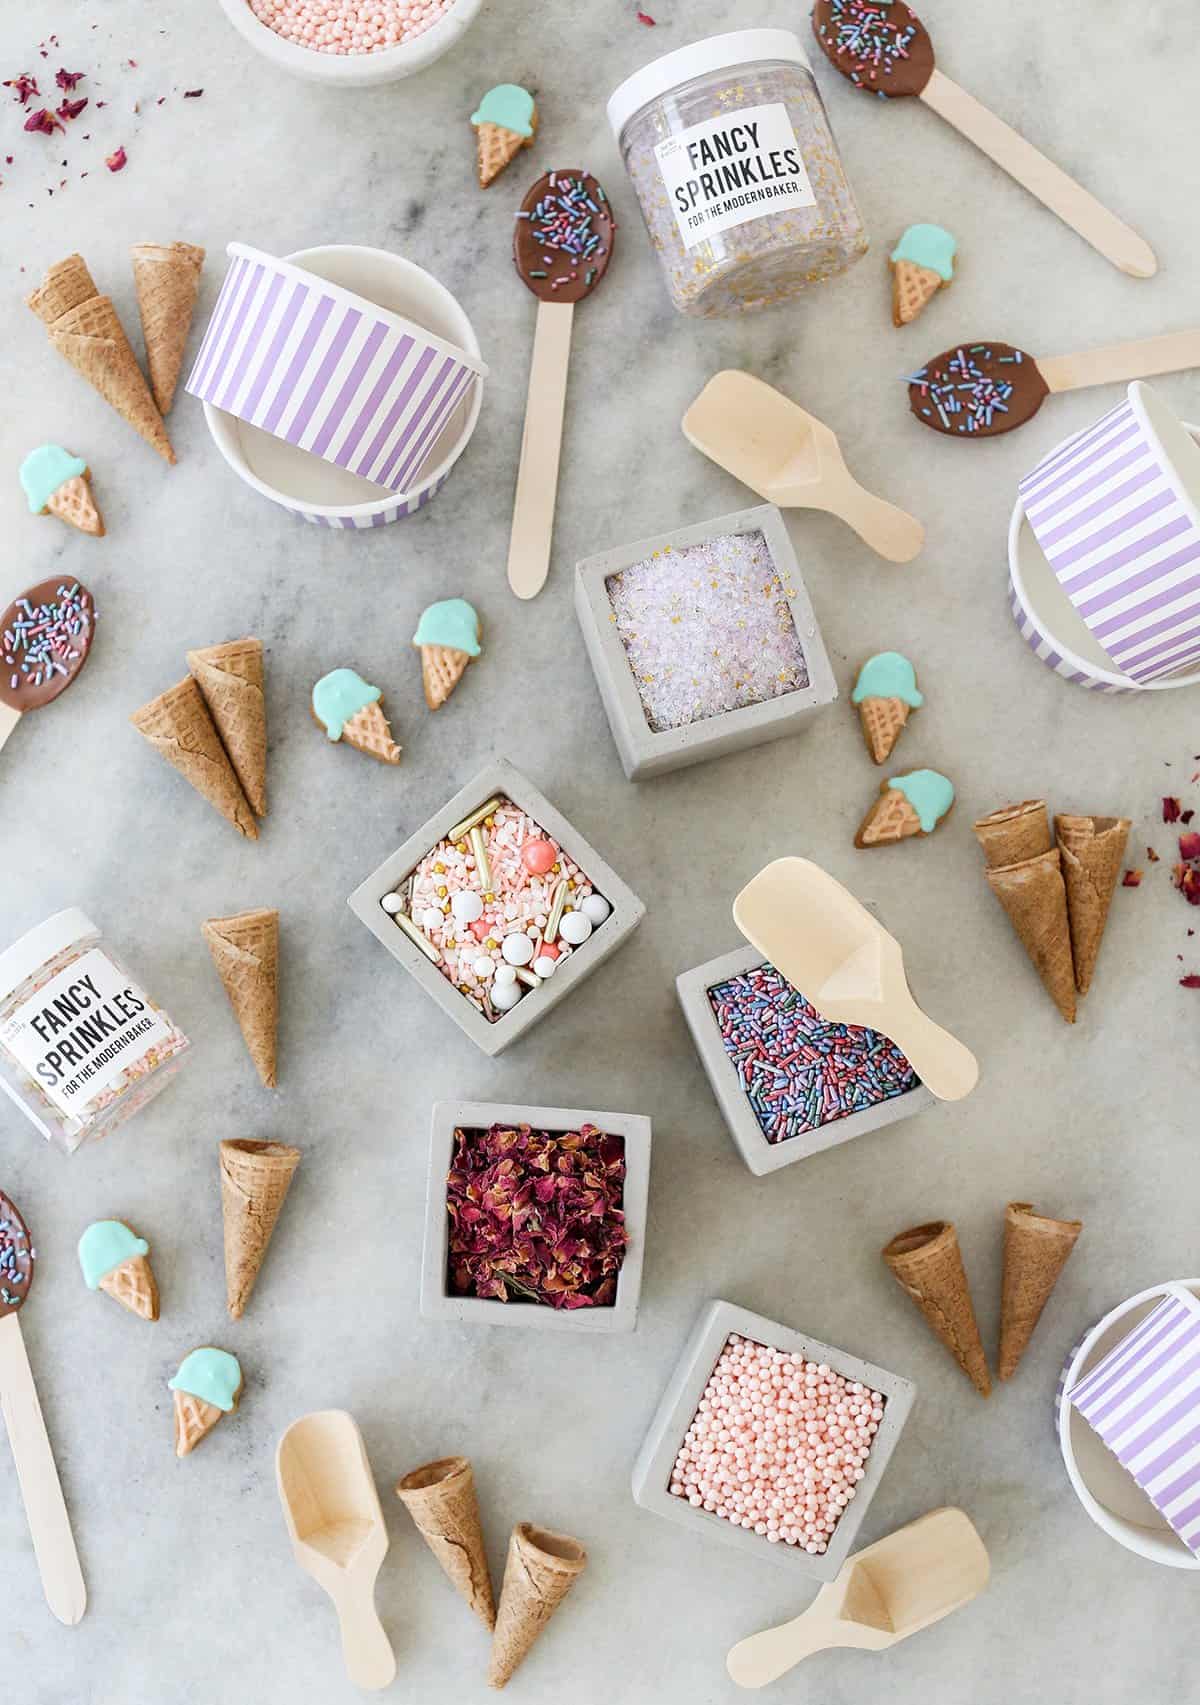 Sprinkles, ice cream cones, and dipped chocolate spoons for ice cream bar toppings.